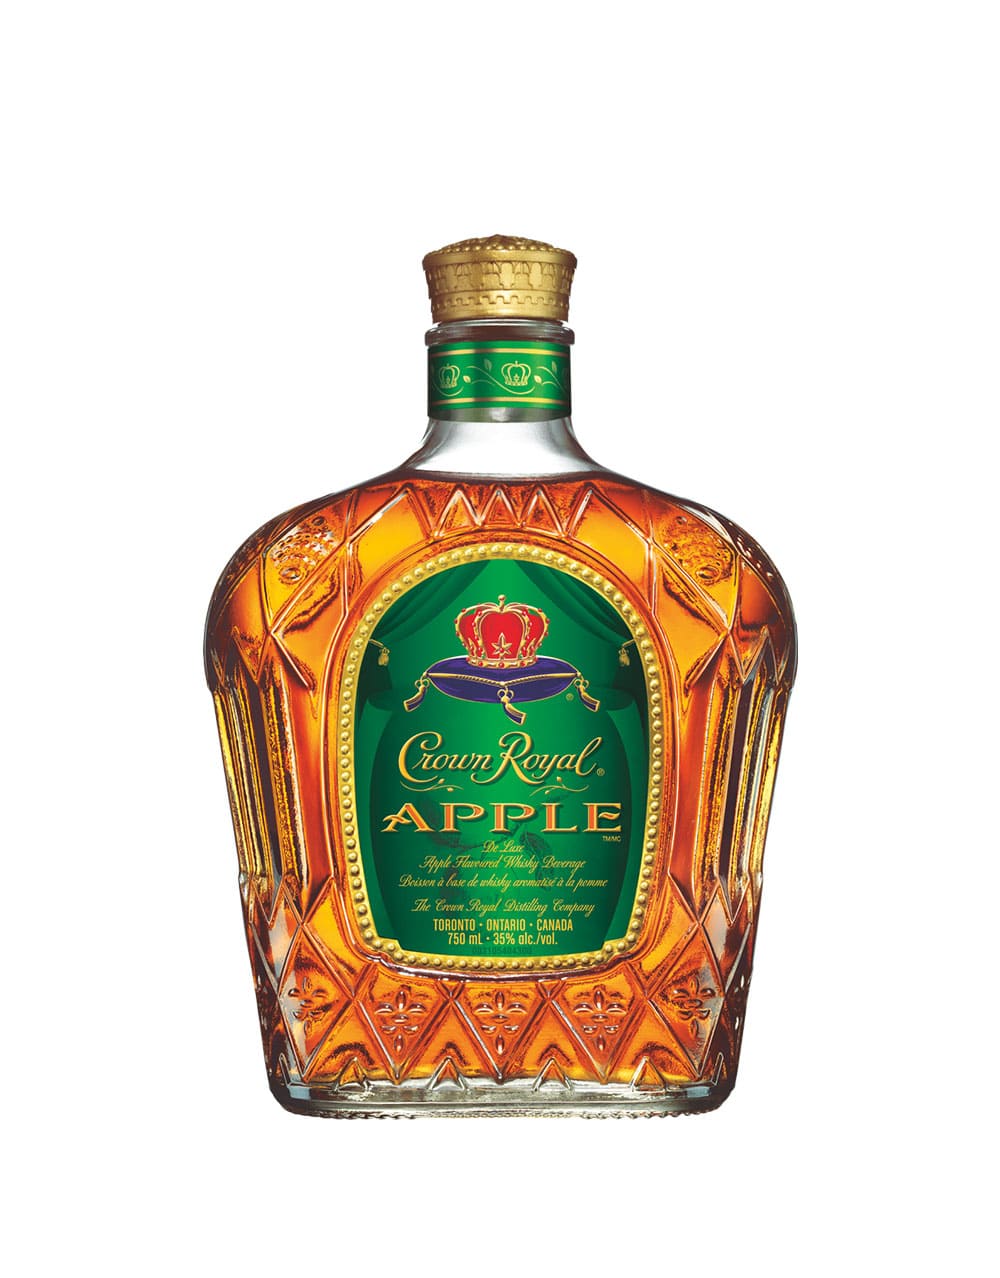 Crown Royal Apple Canadian Whisky 375ml